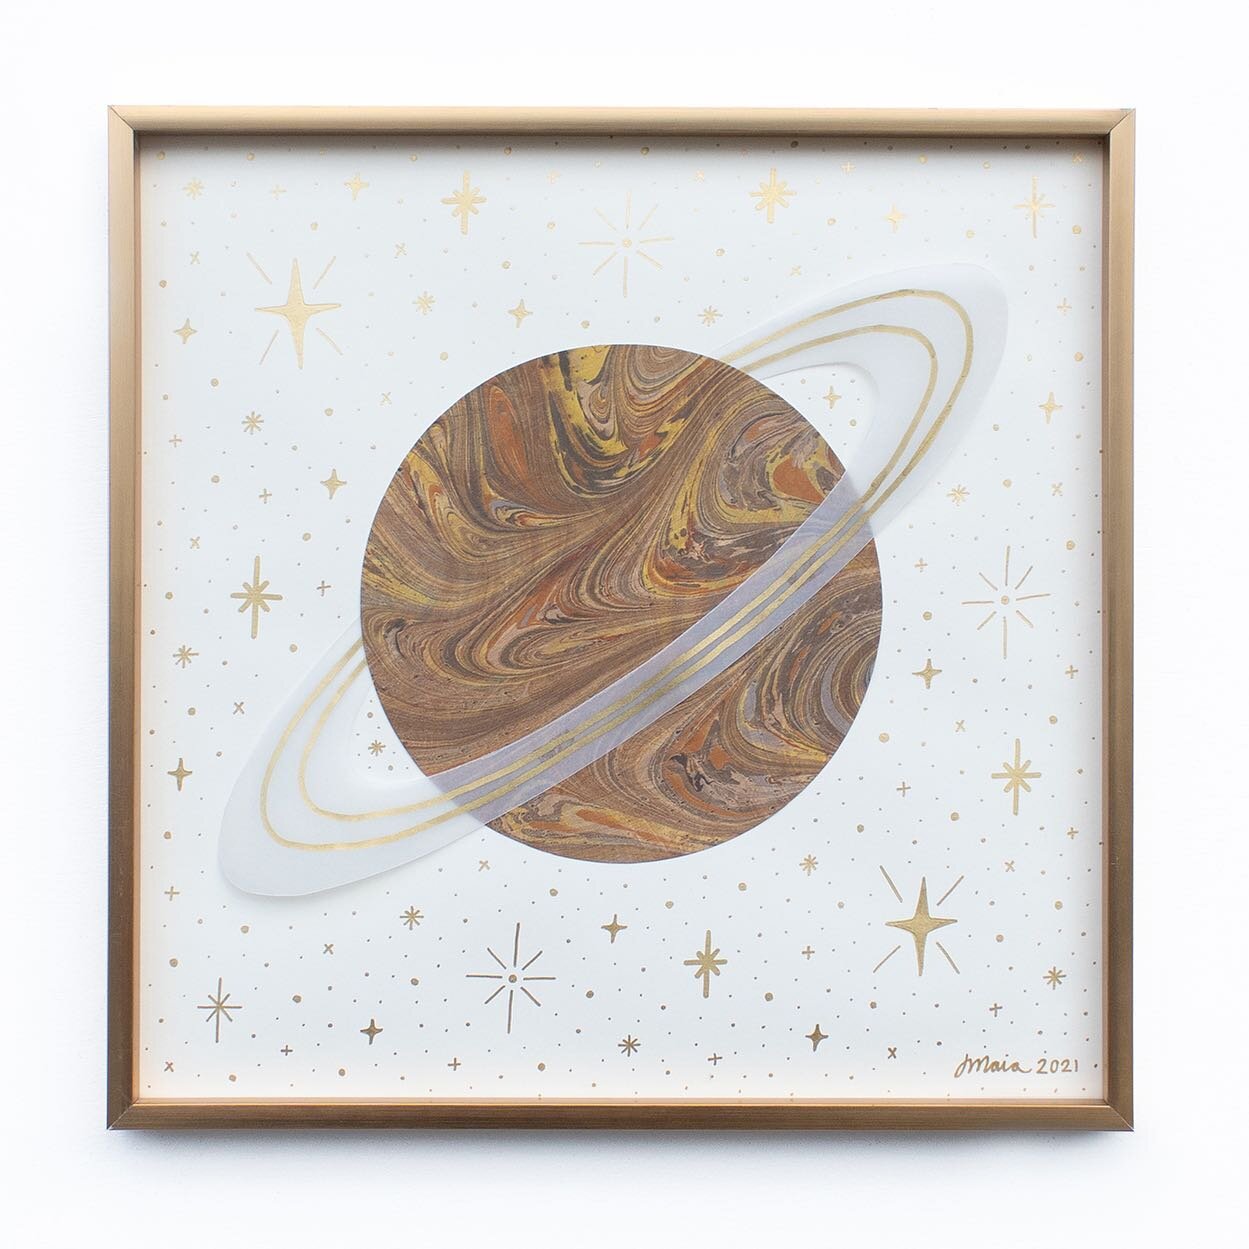 Happy Saturday! Coming on here today to share my first blog post since 2019 is officially live on my website. I originally put together a newsletter all about Saturn back in February, but it got too comprehensive, and I instead decided to give it a m